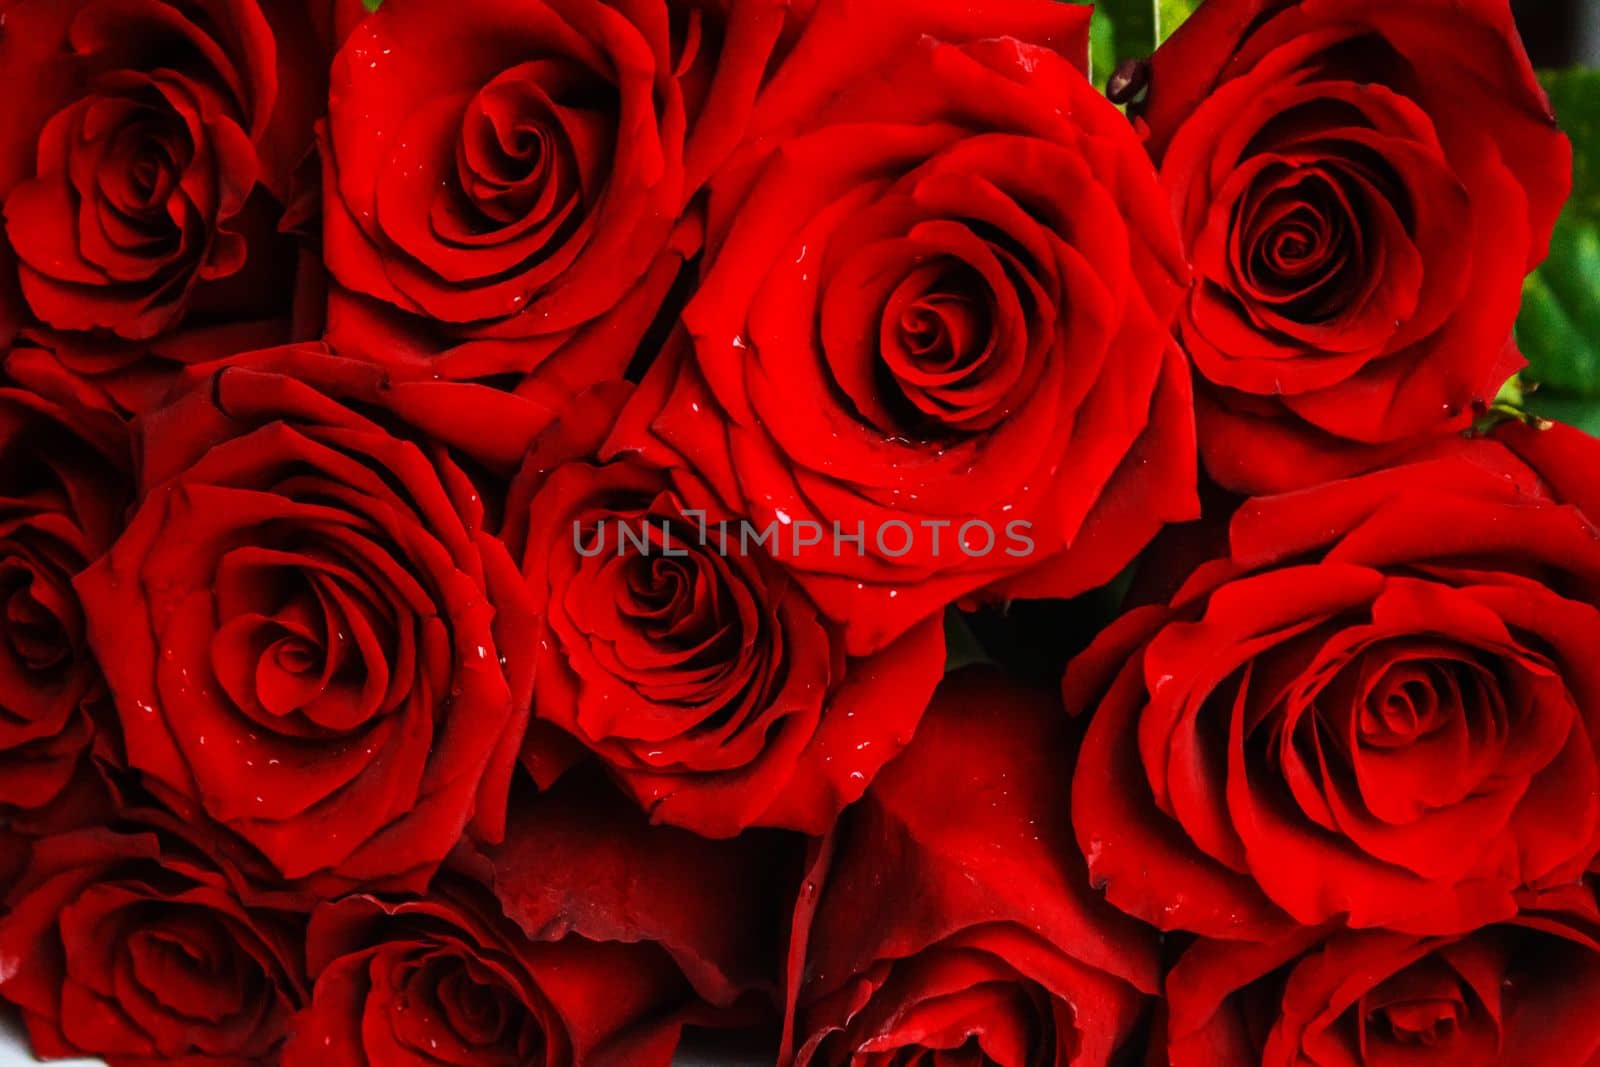 red rose on a wooden background. Valentine's Day gift.selective focus.holiday